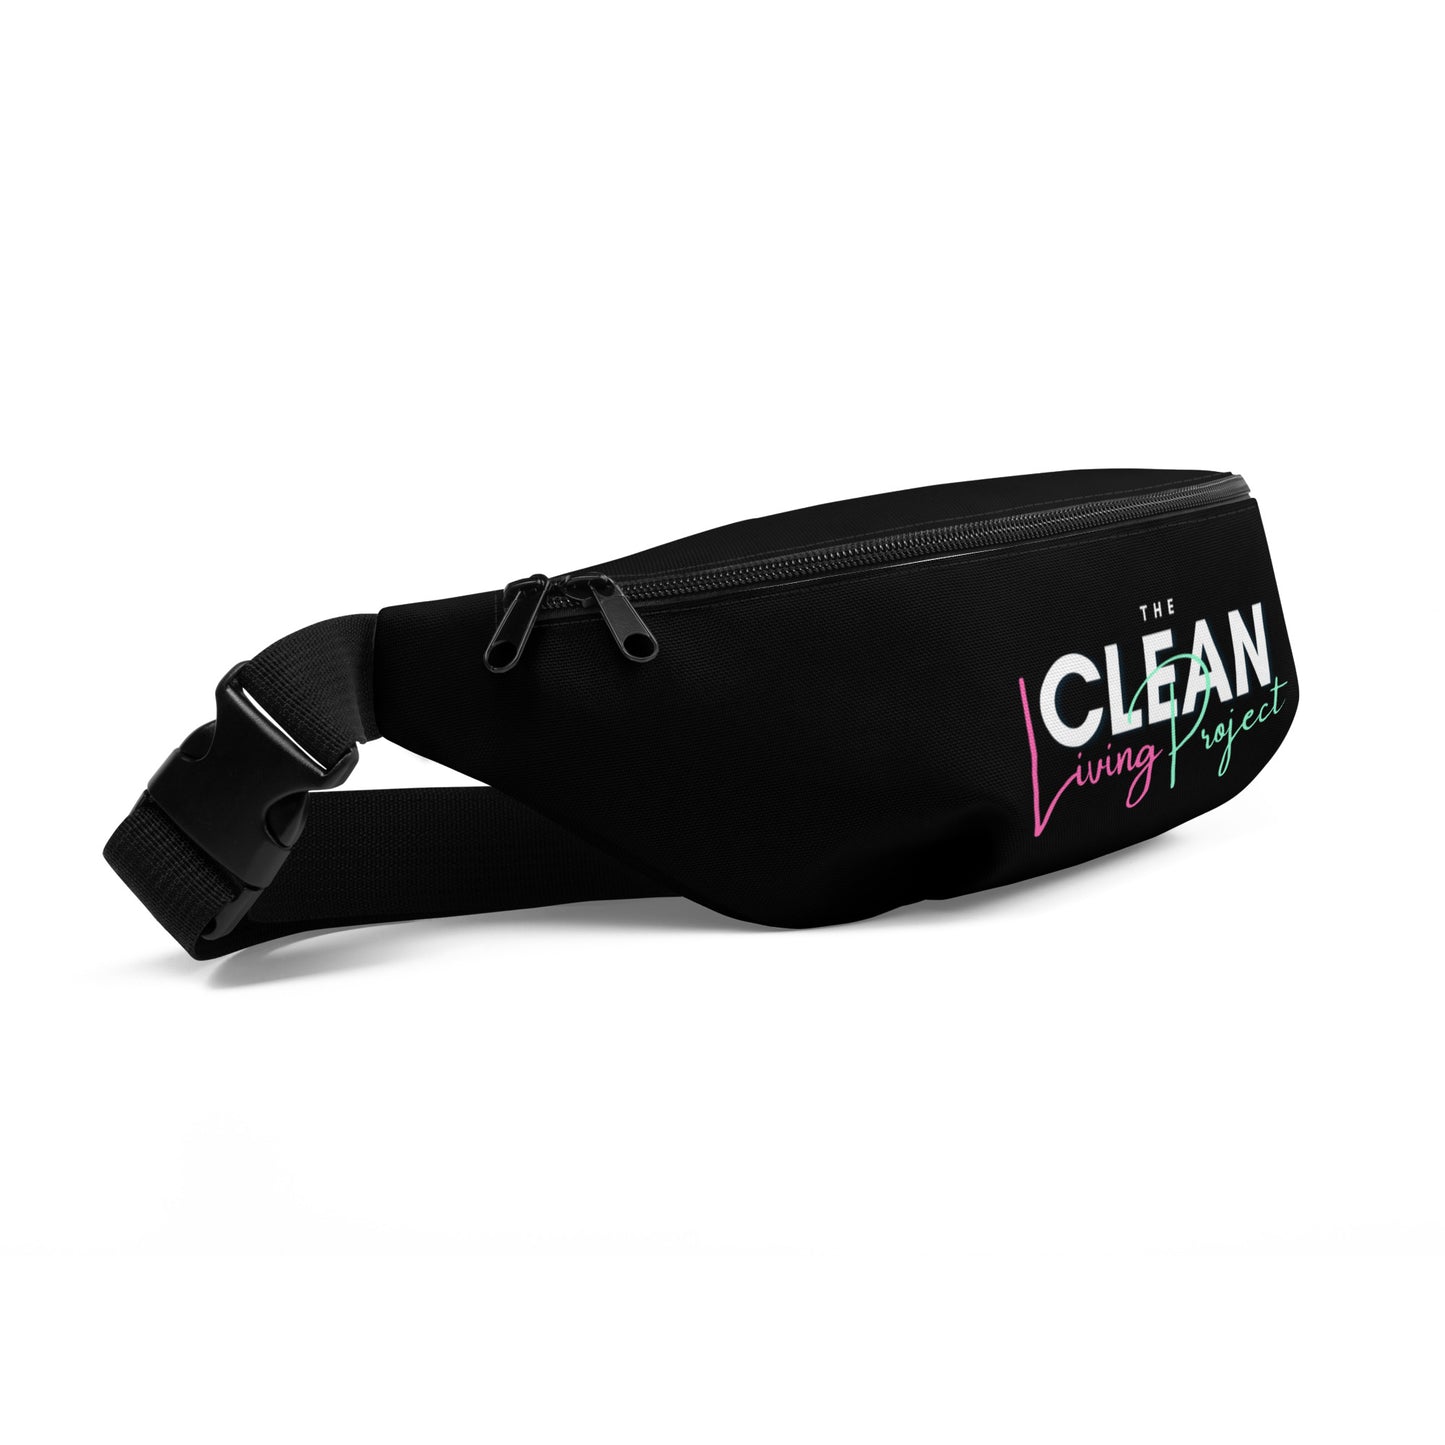 The Clean Living Project Fanny Pack (black)